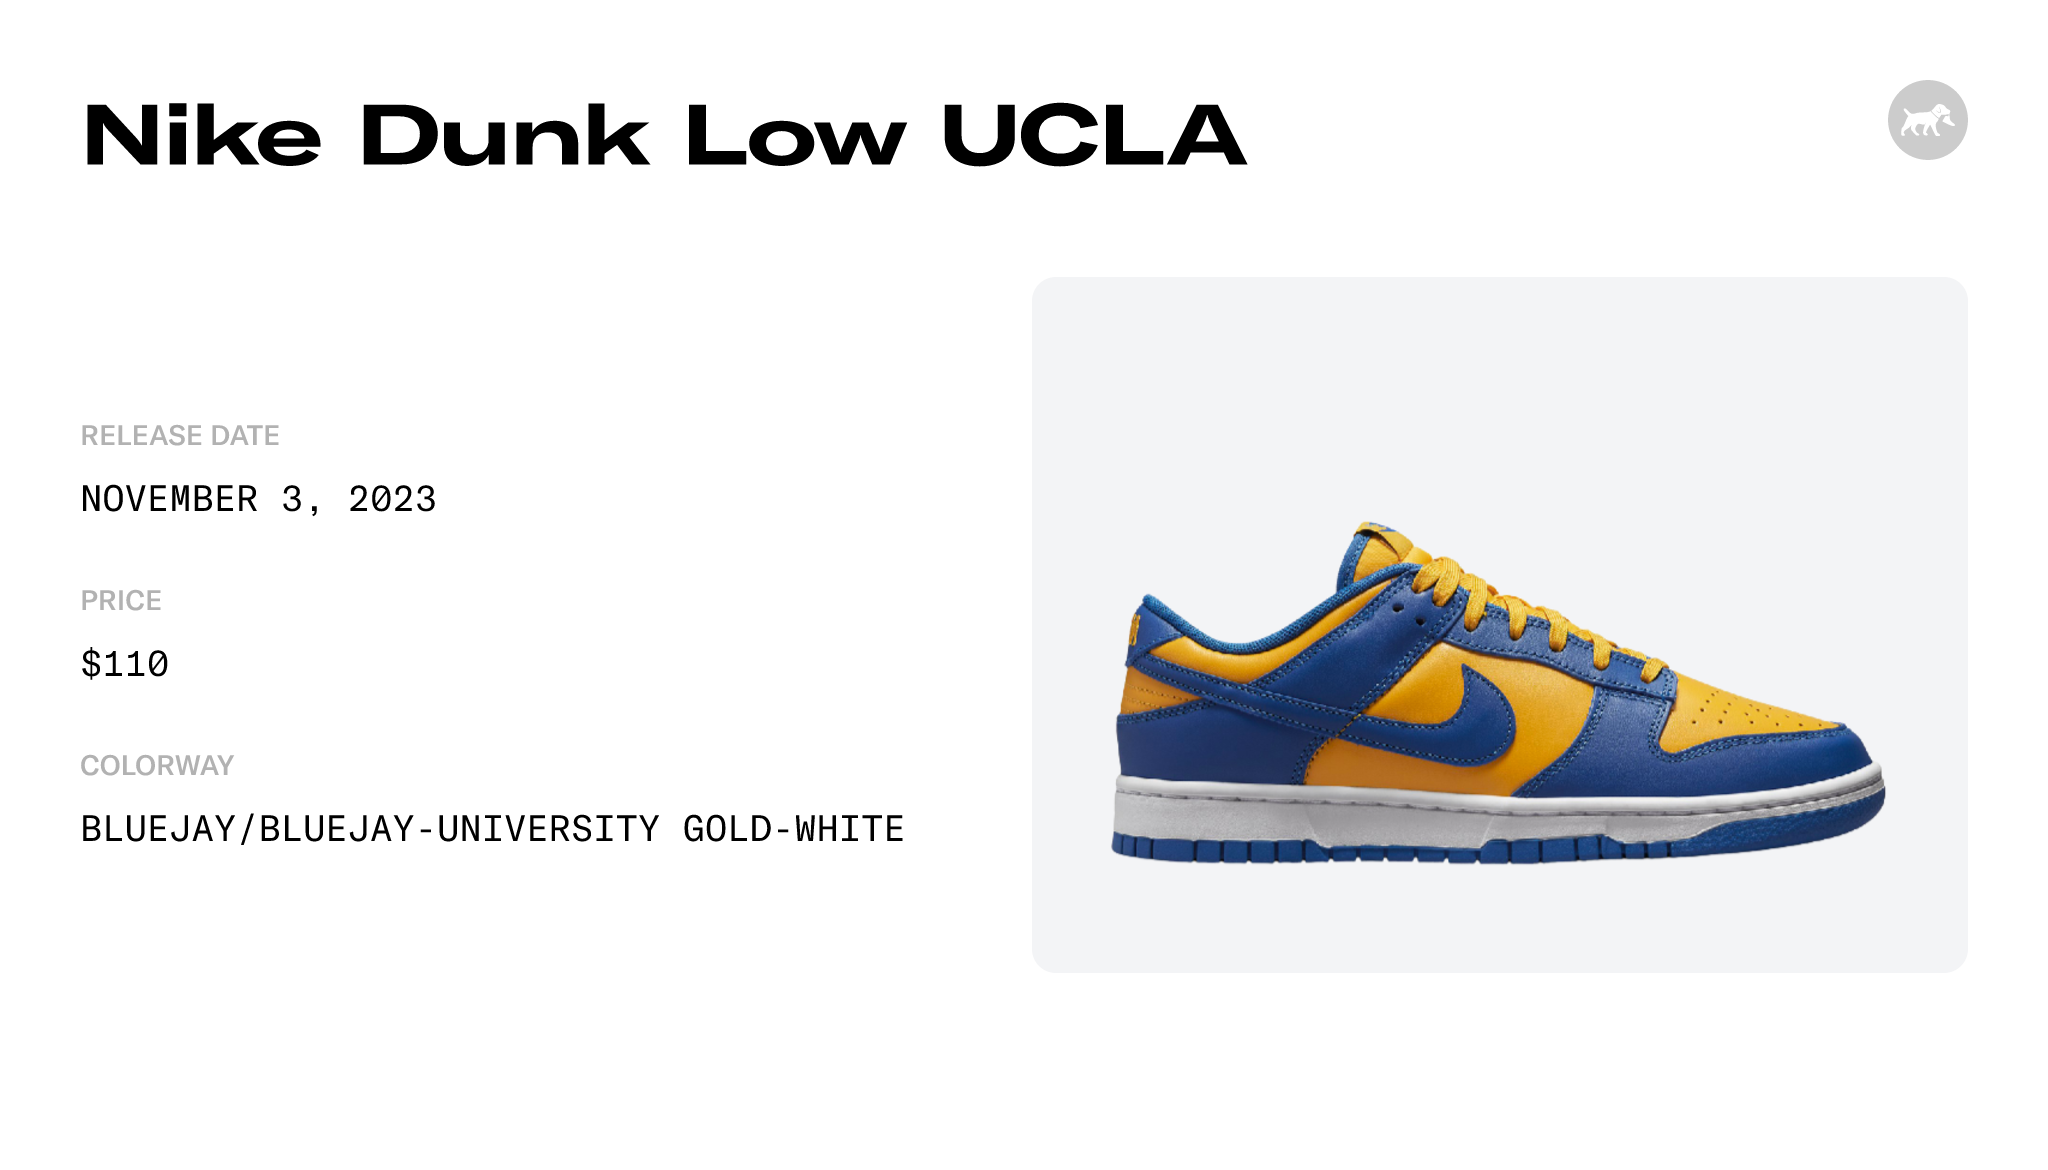 Nike Dunk Low UCLA - DD1391-402 Raffles and Release Date